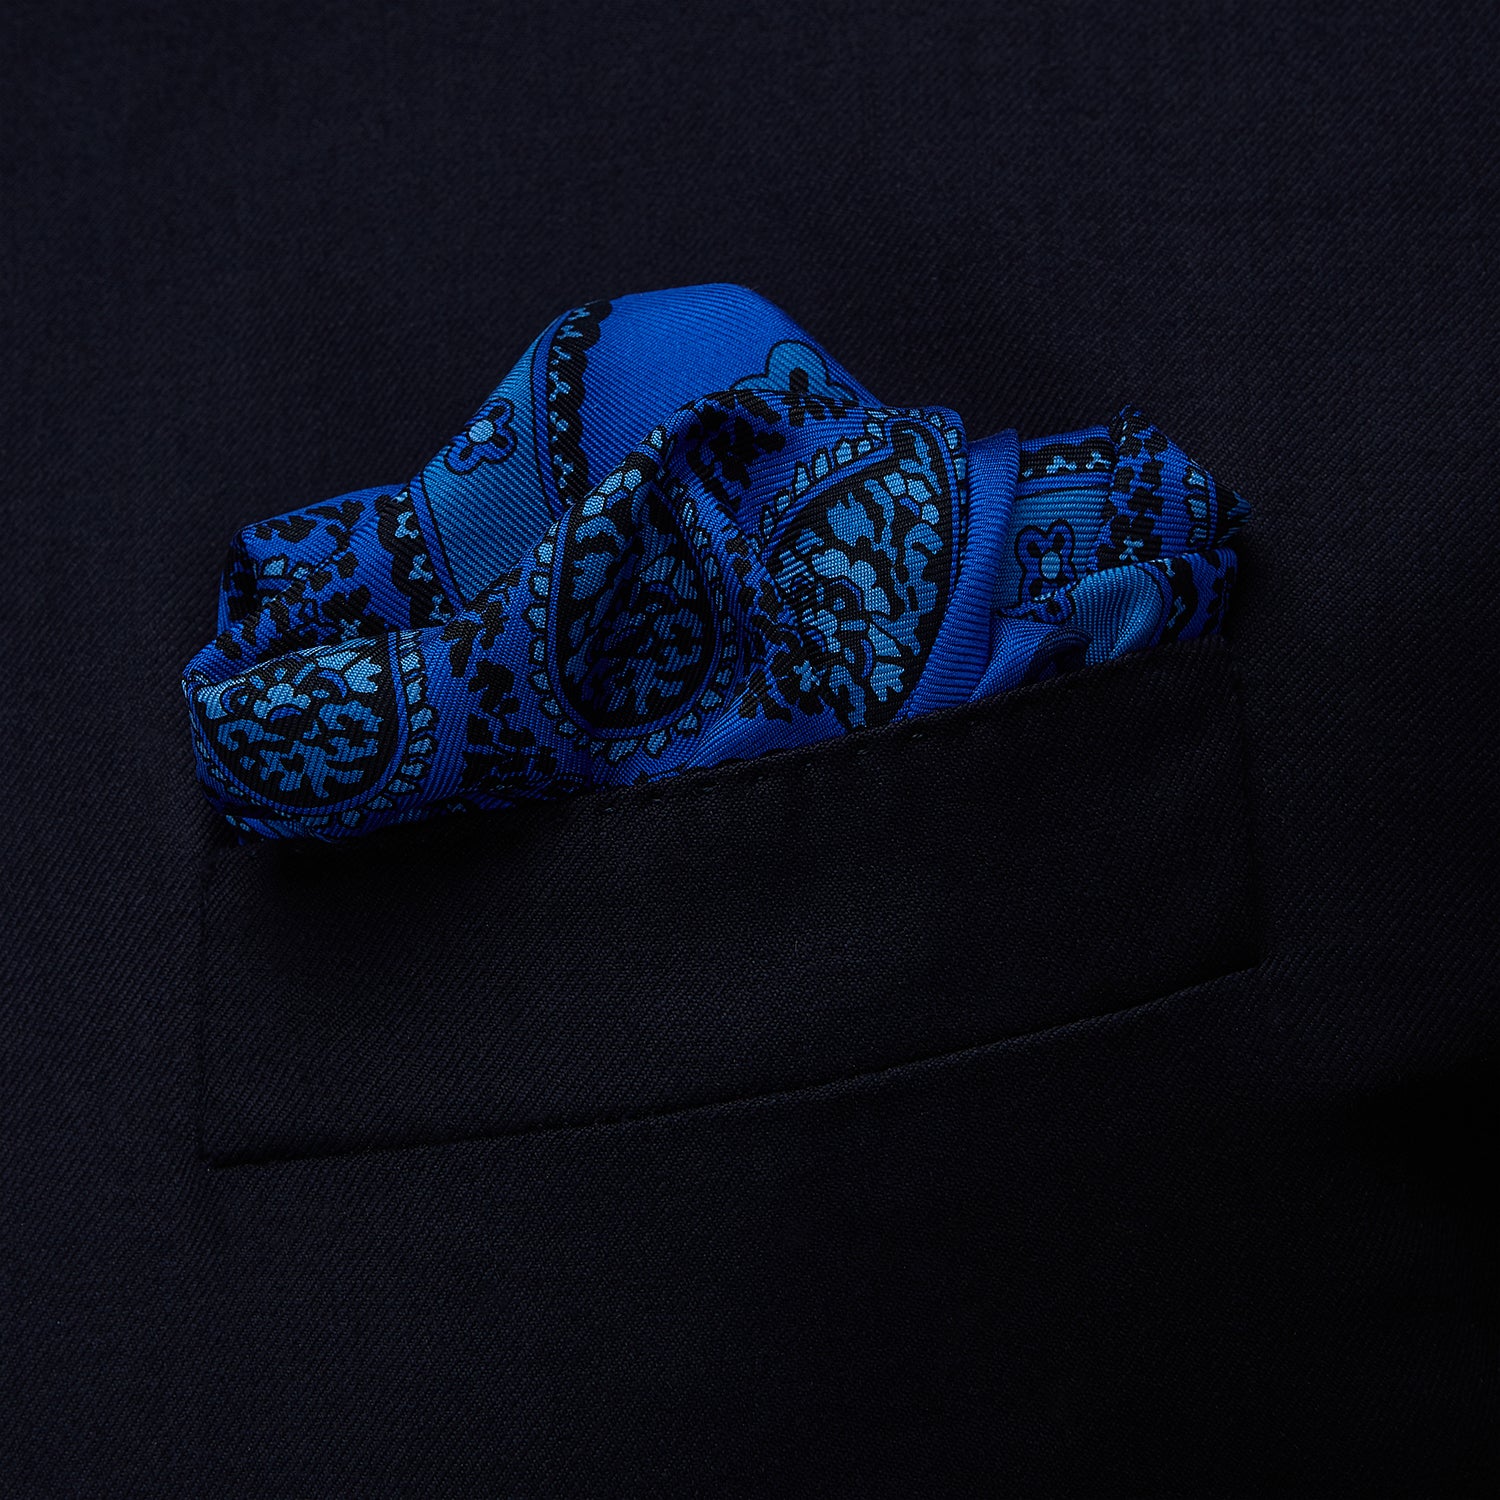 Blue Squiggle Paisley Pocket Square